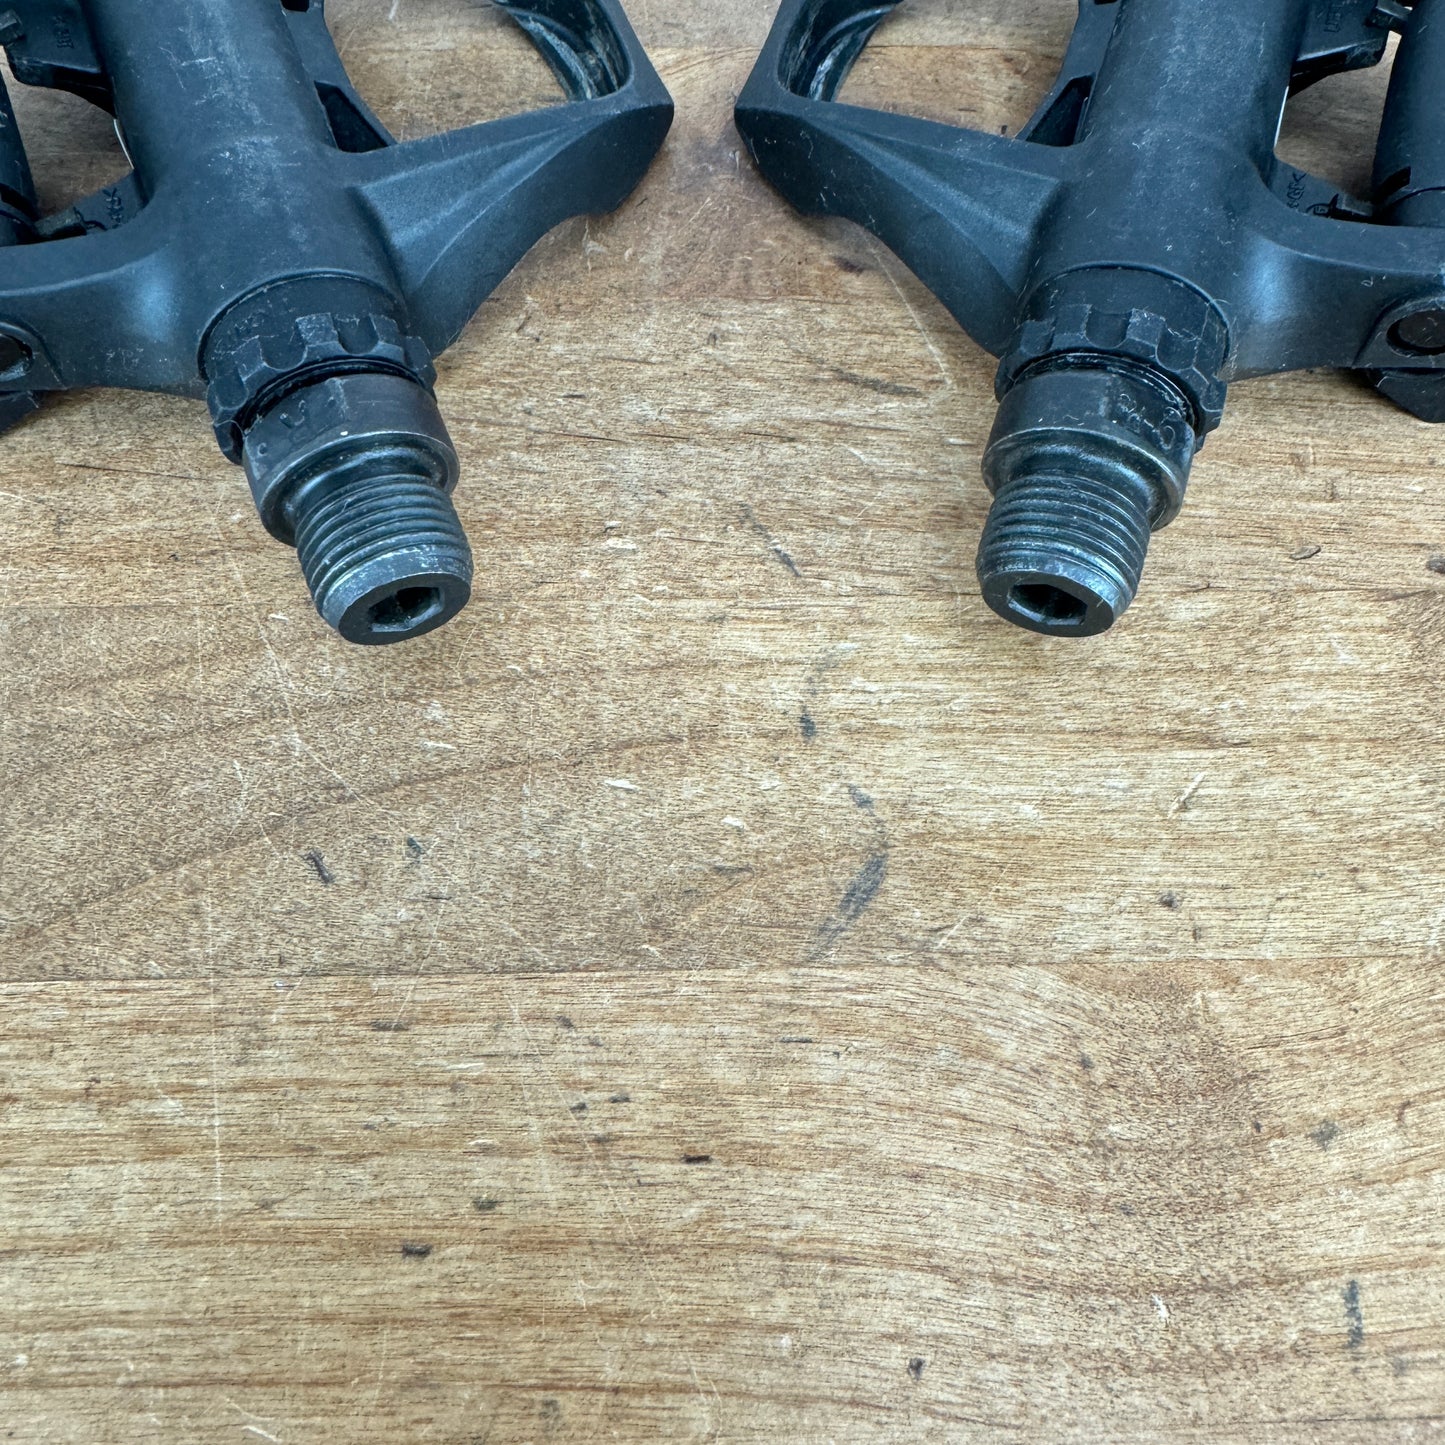 Shimano SPD-SL PD-R550 Steel Spindle Clipless Bike Pedals 310g